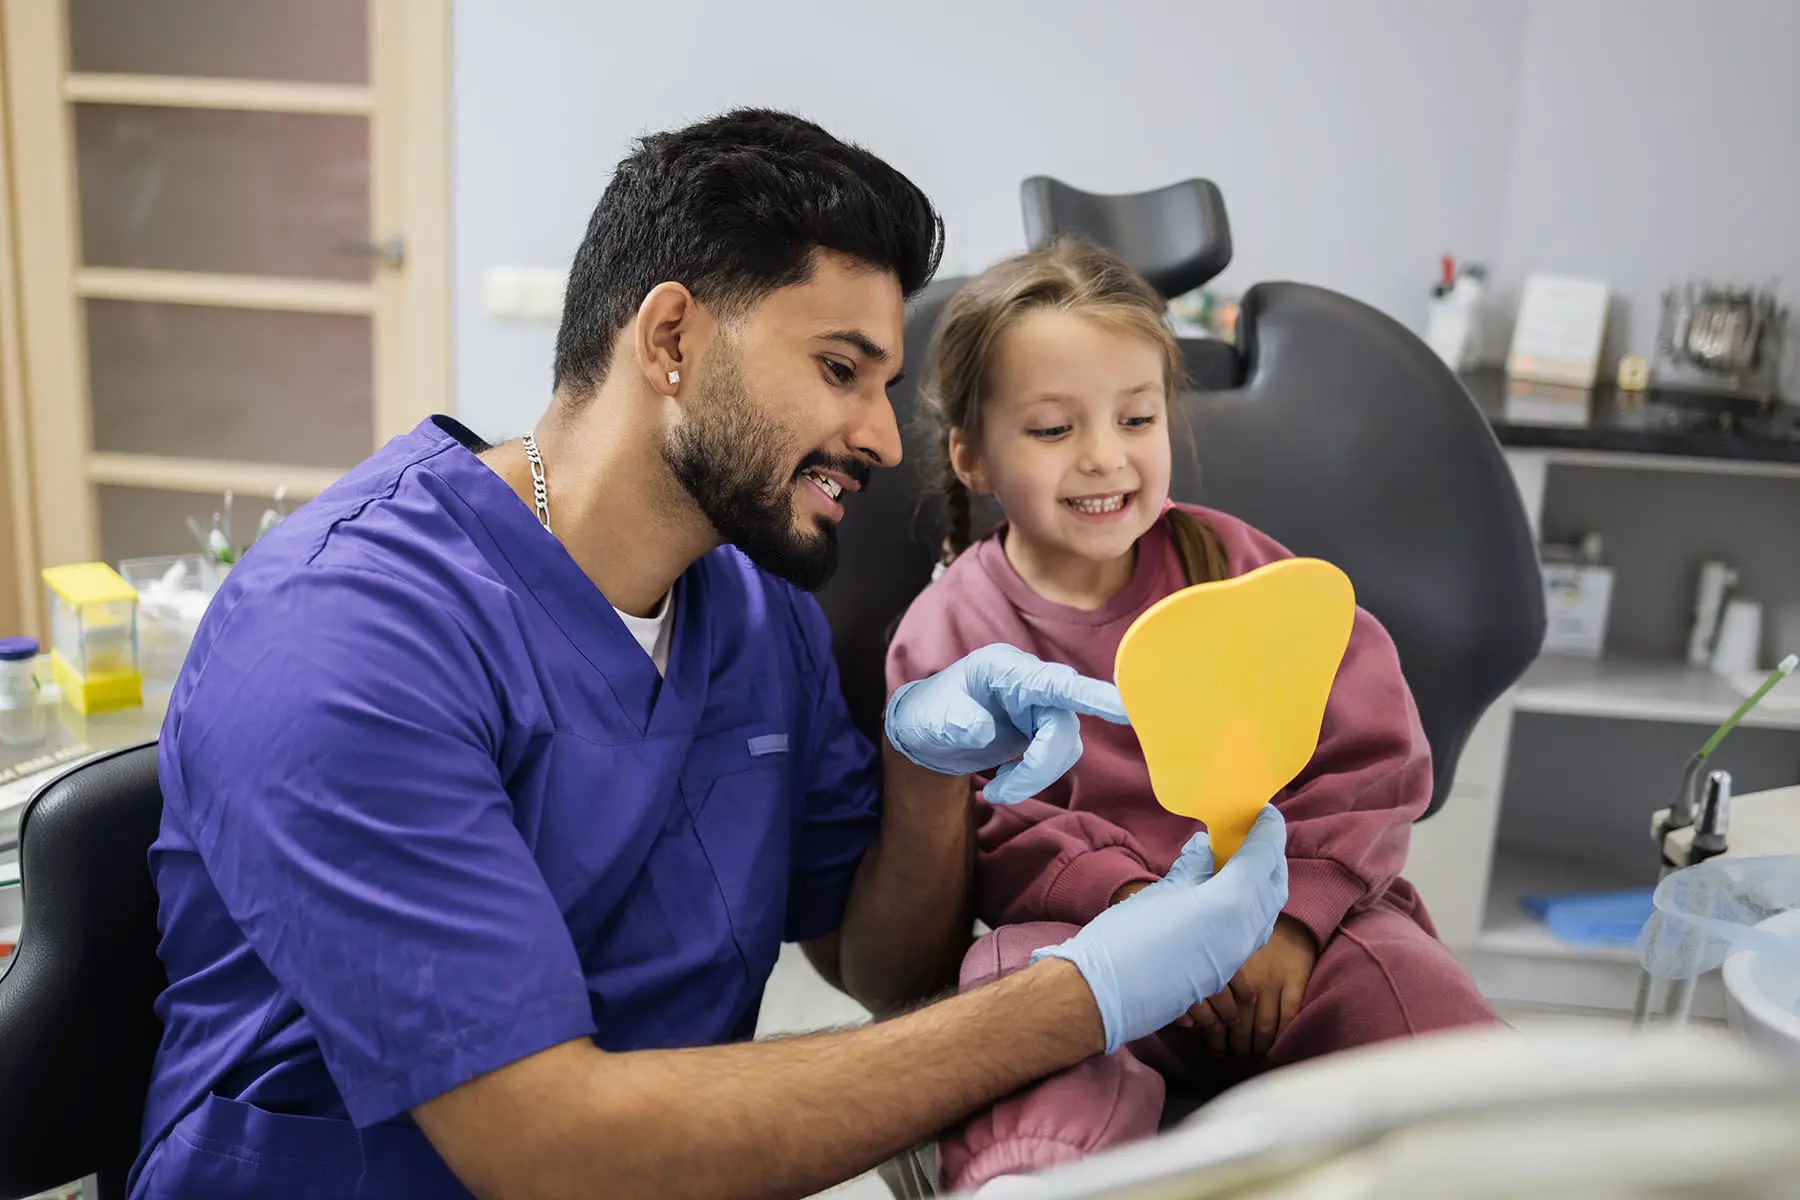 Dentist holding up a mirror for a young girl to smile in.